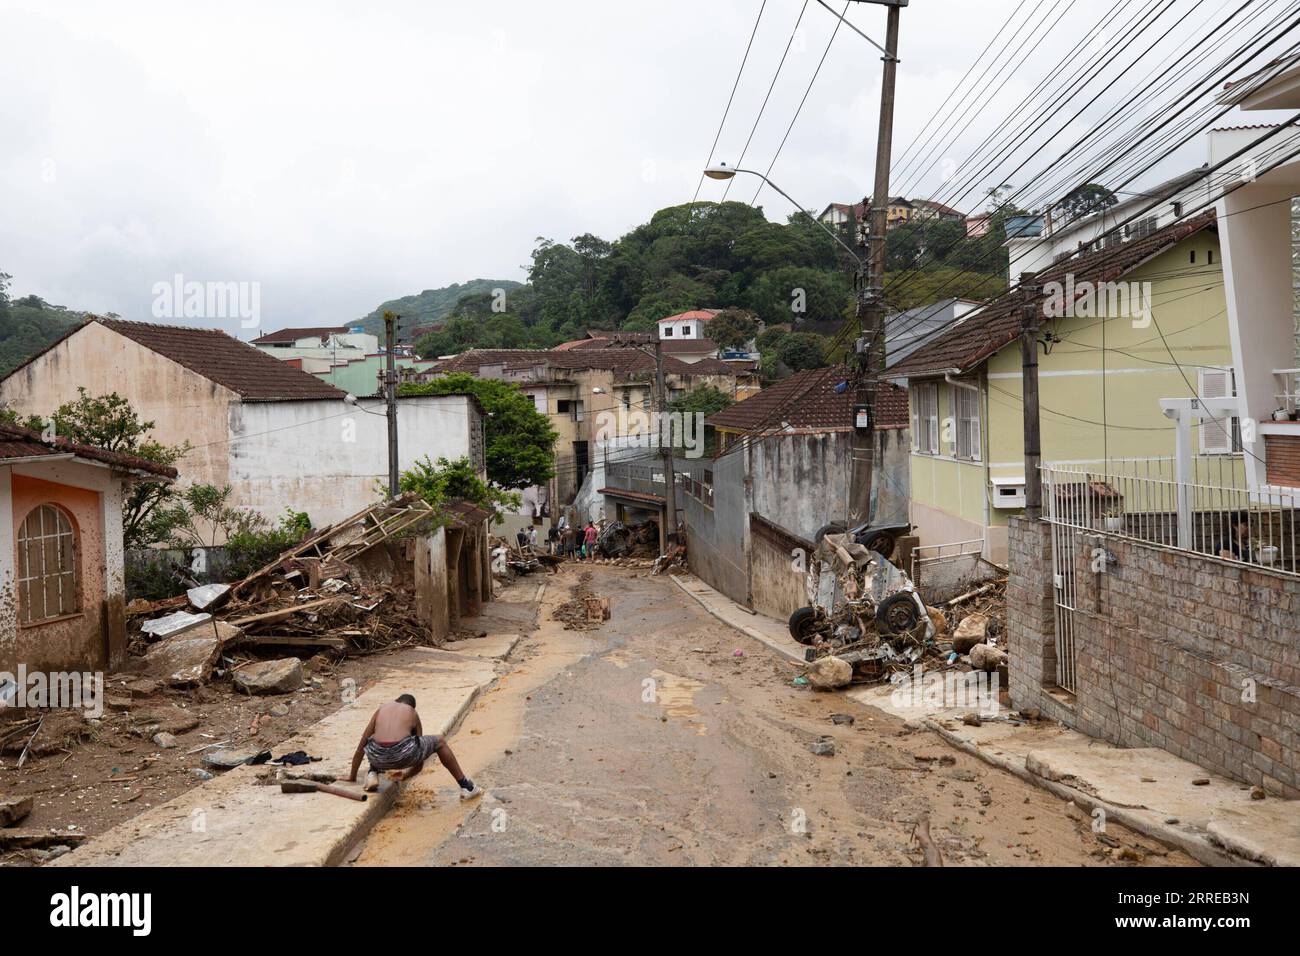 220217 -- PETROPOLIS, Feb. 17, 2022 -- Damaged buildings are seen after heavy rains in Petropolis in the state of Rio de Janeiro, Brazil, Feb. 16, 2022. The death toll from landslides and floods in the Brazilian city of Petropolis in Rio de Janeiro state rose to 78, including six children, local authorities said Wednesday.  BRAZIL-RIO DE JANEIRO-PETROPOLIS-HEAVY RAINS-AFTERMATH WangxTiancong PUBLICATIONxNOTxINxCHN Stock Photo